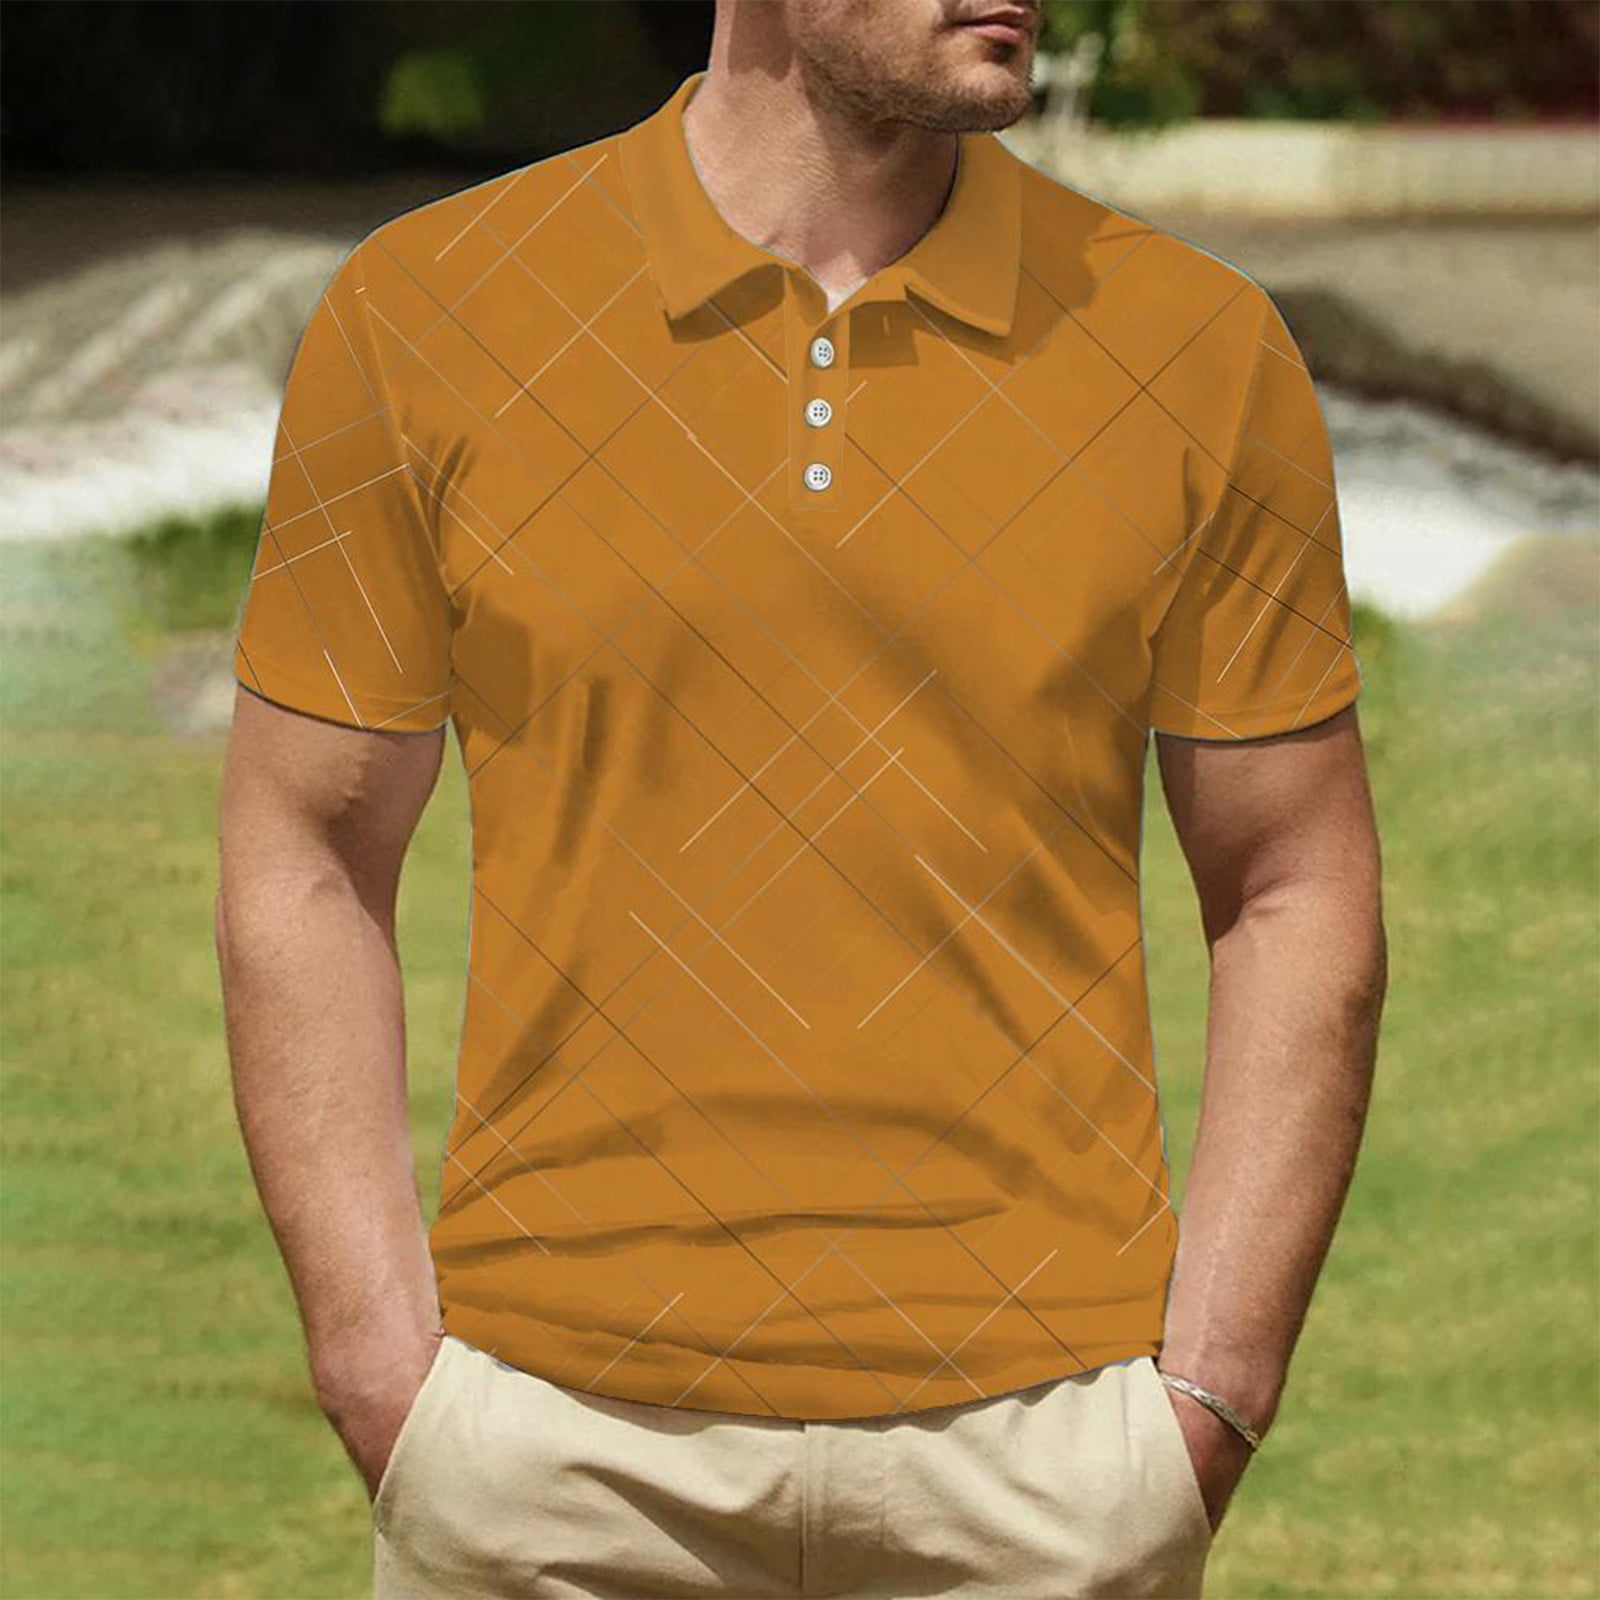 Men's Summer Casual Short Sleeves V-neck Polo Shirts/Male Slim Fit